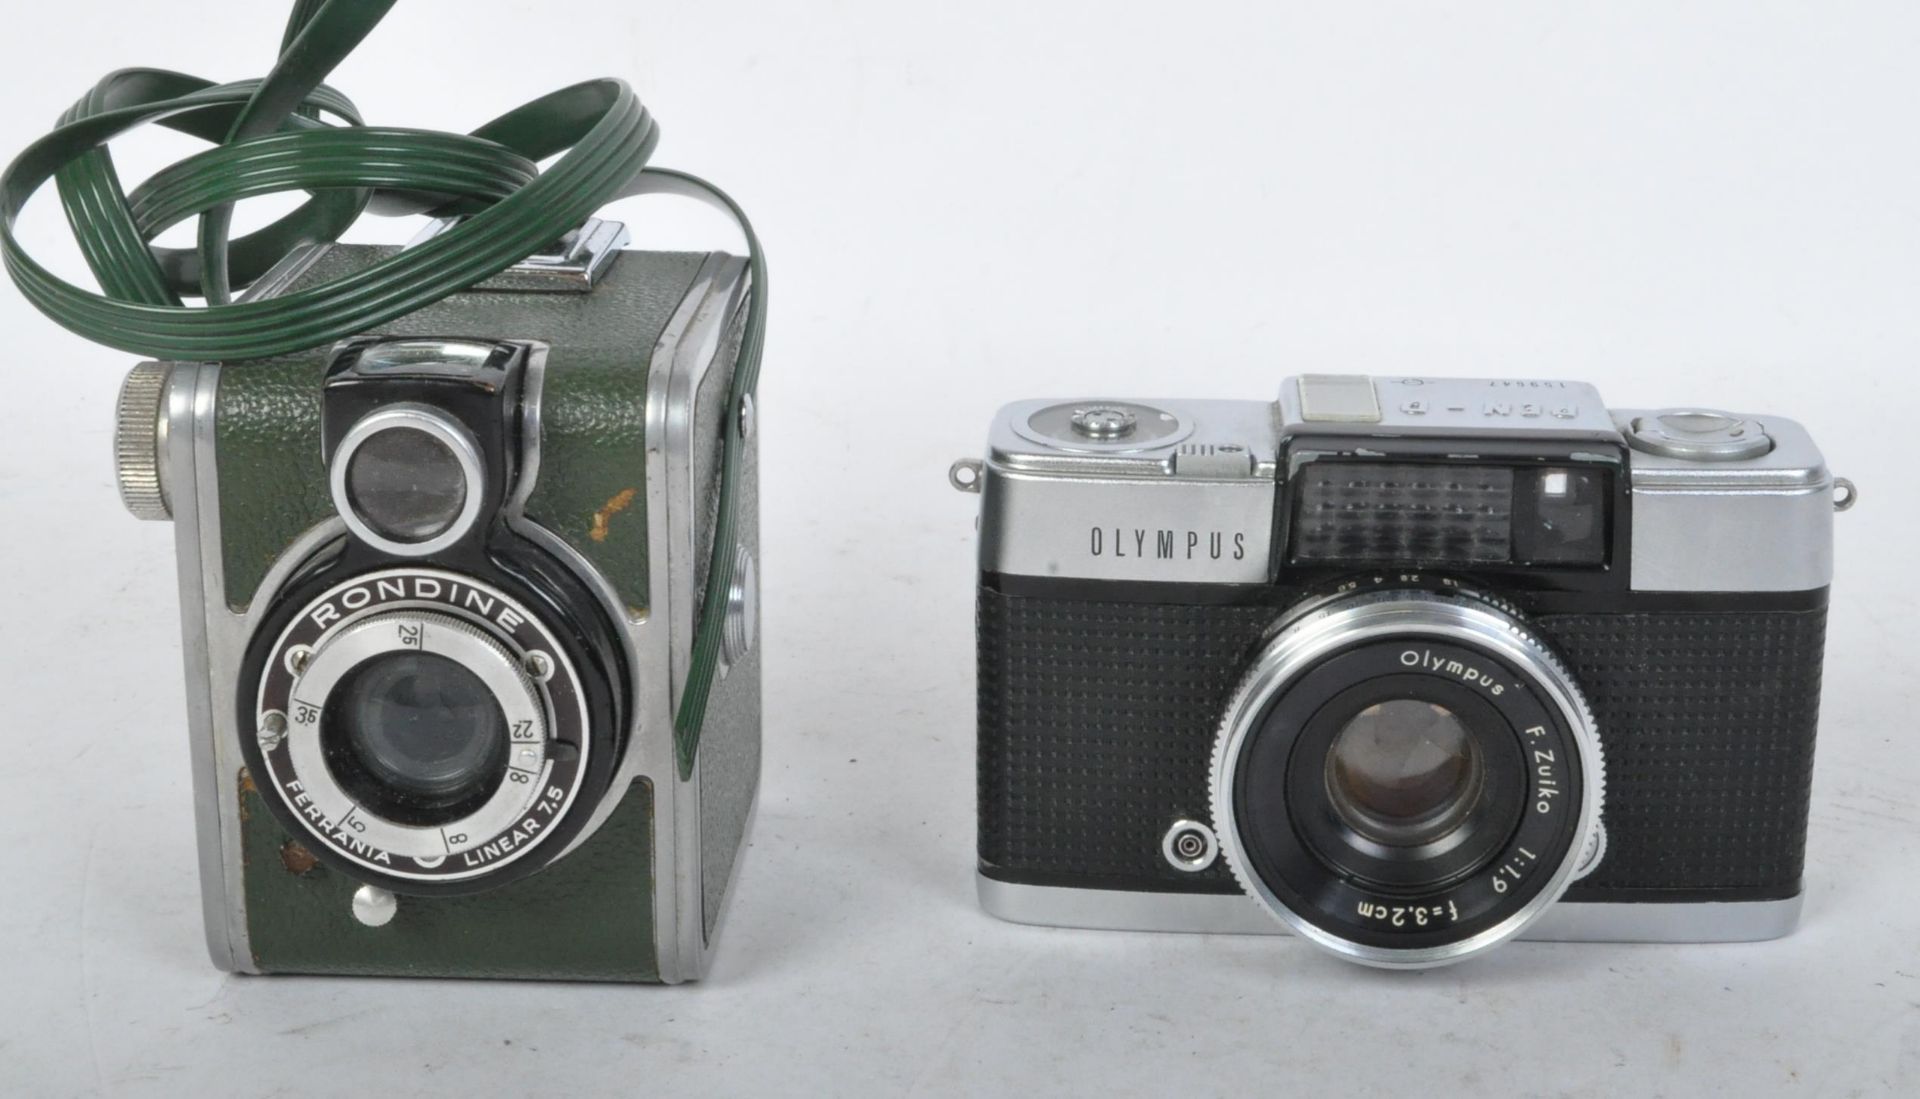 VINTAGE OLYMPUS PEN-D CAMERA WITH RONDINE BOX CAMERA